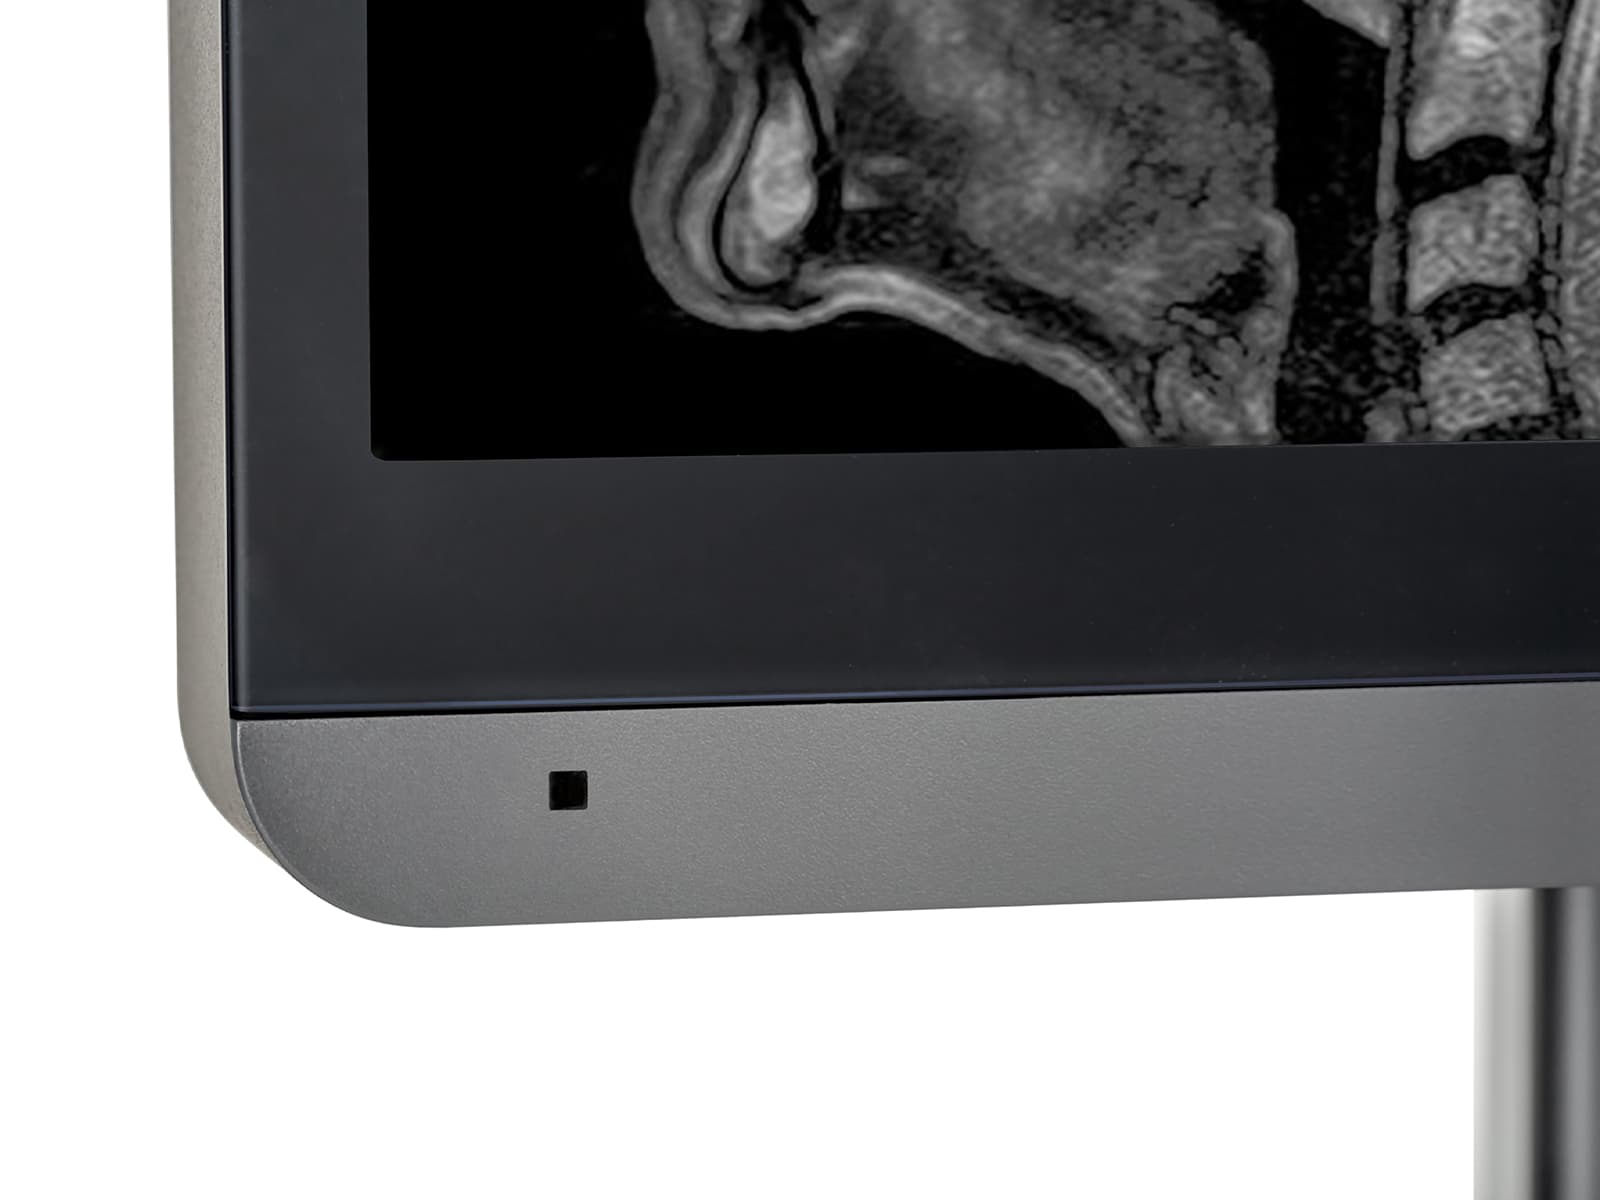 JVC Totoku MS-S300 3MP 21" LED Grayscale General Radiology Diagnostic Display Monitor (MS-S300) Monitors.com 